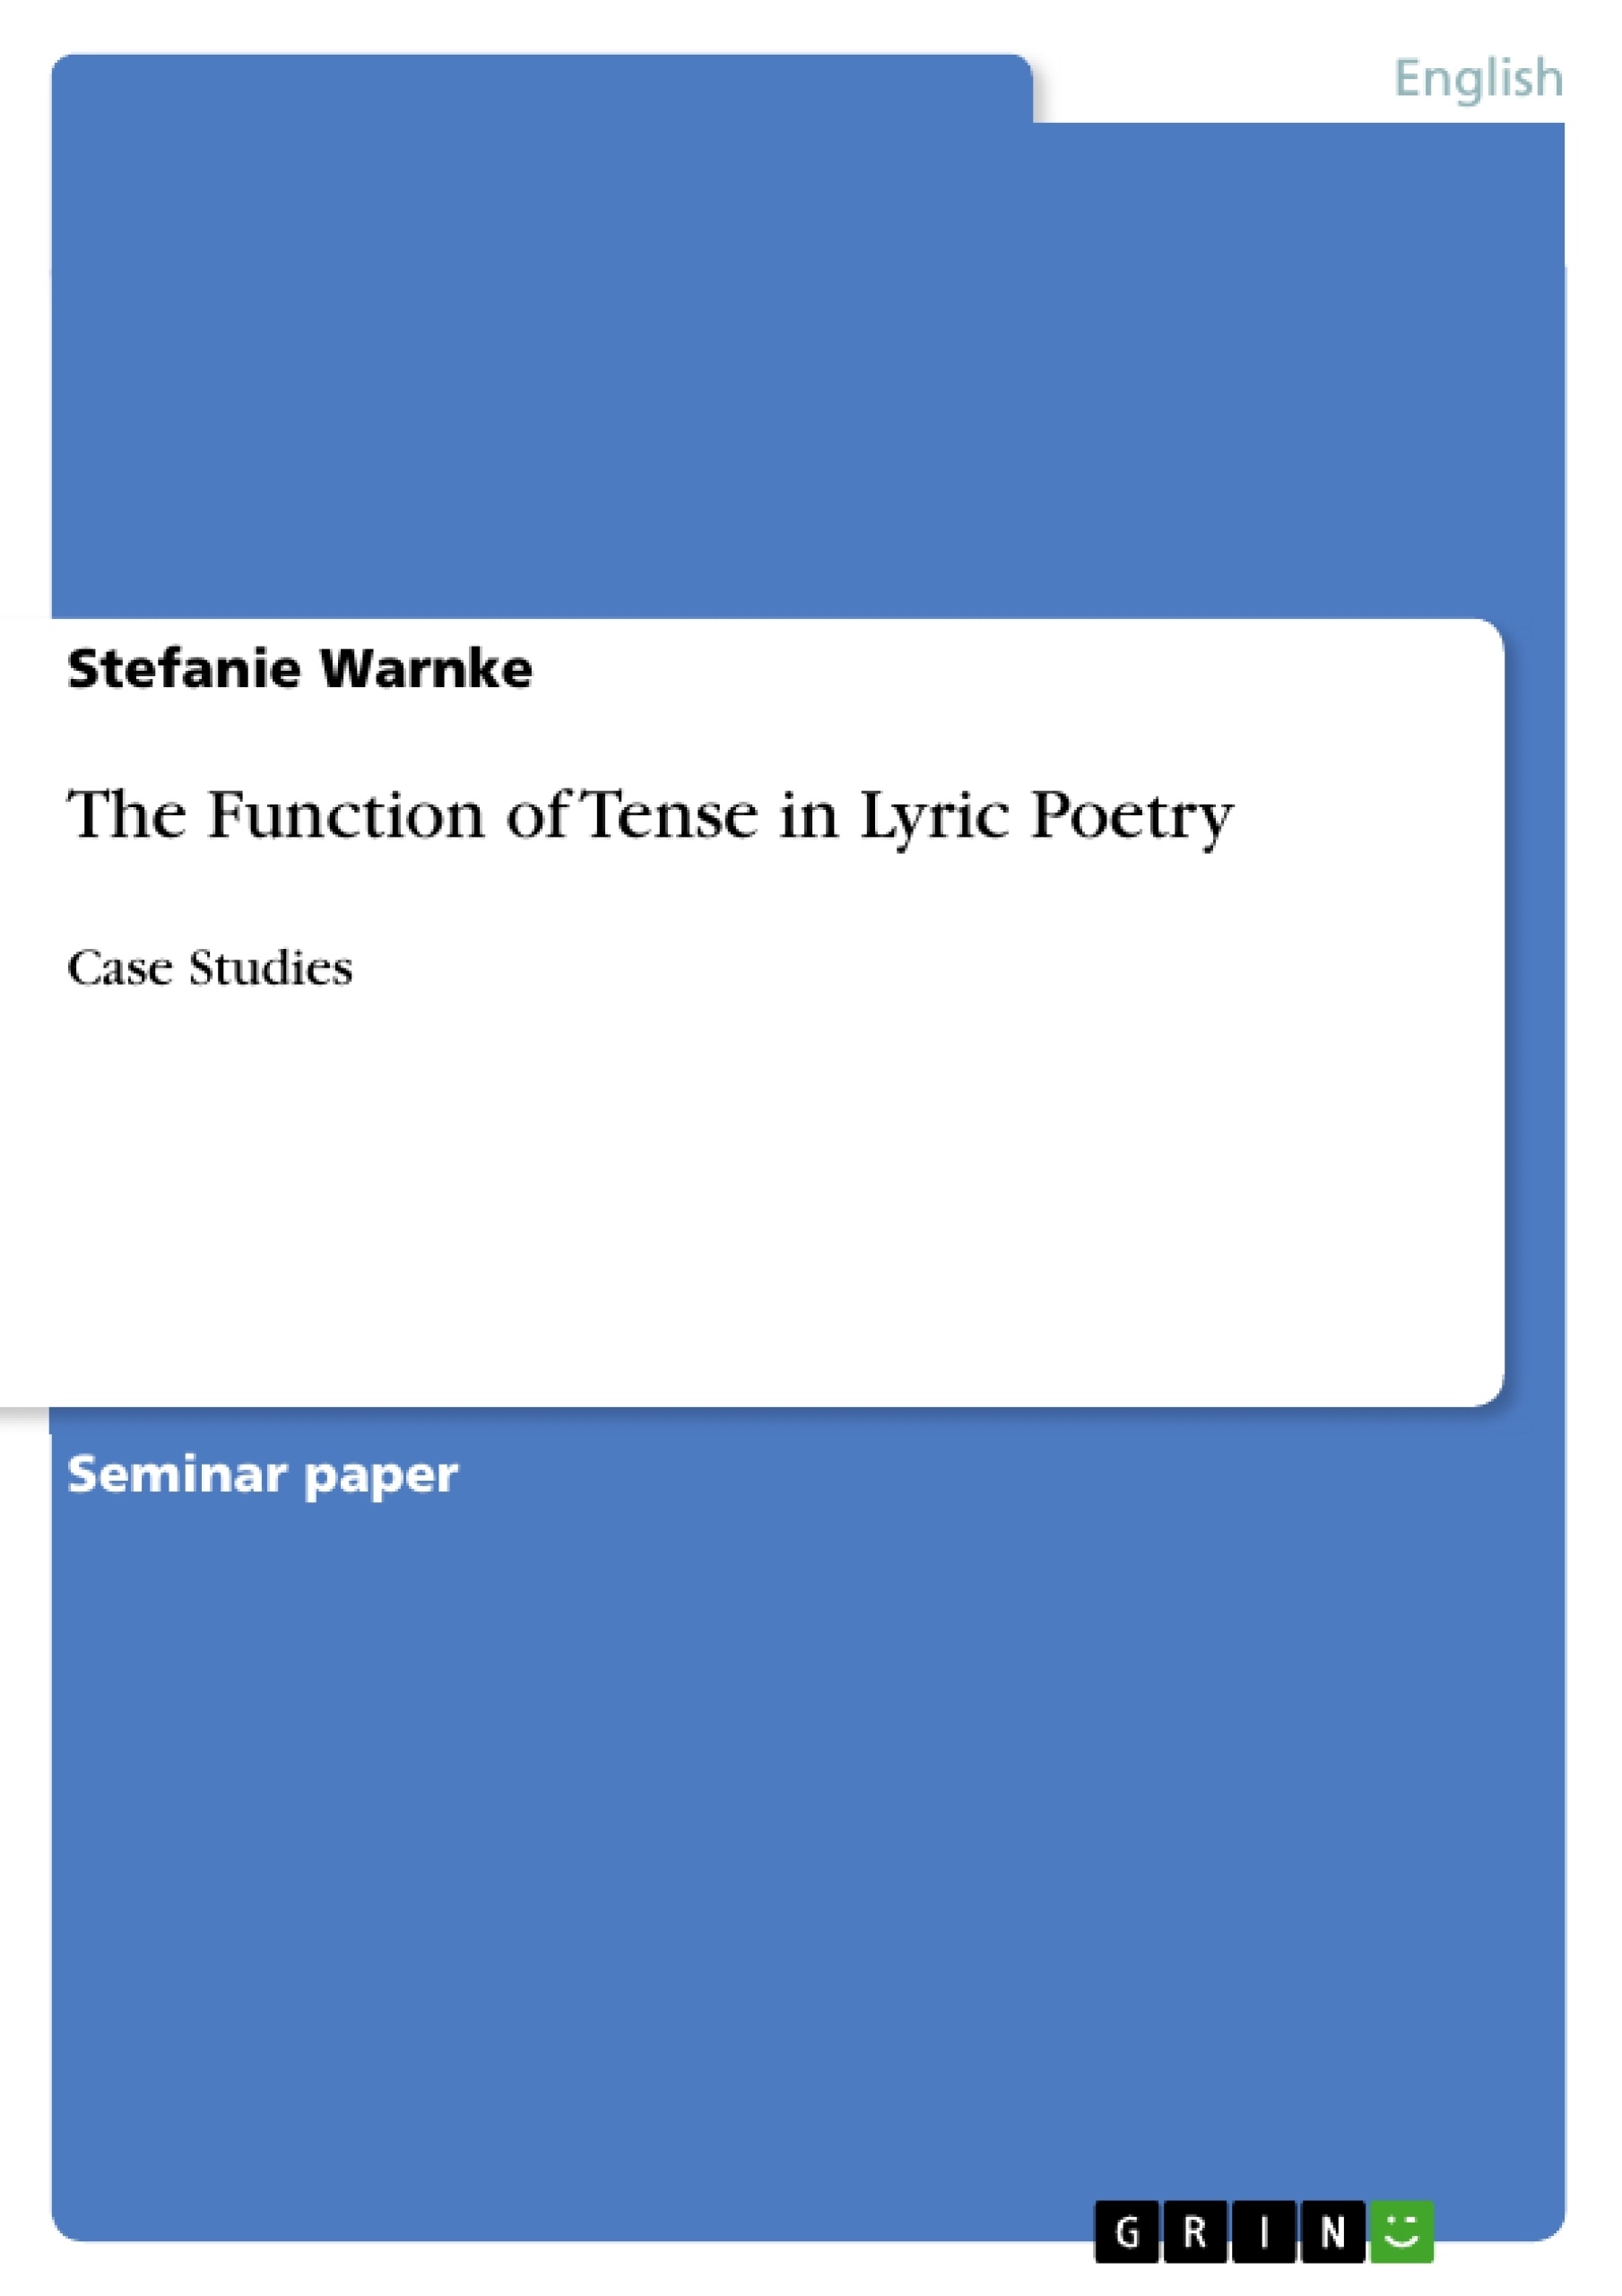 The Function of Tense in Lyric Poetry - GRIN